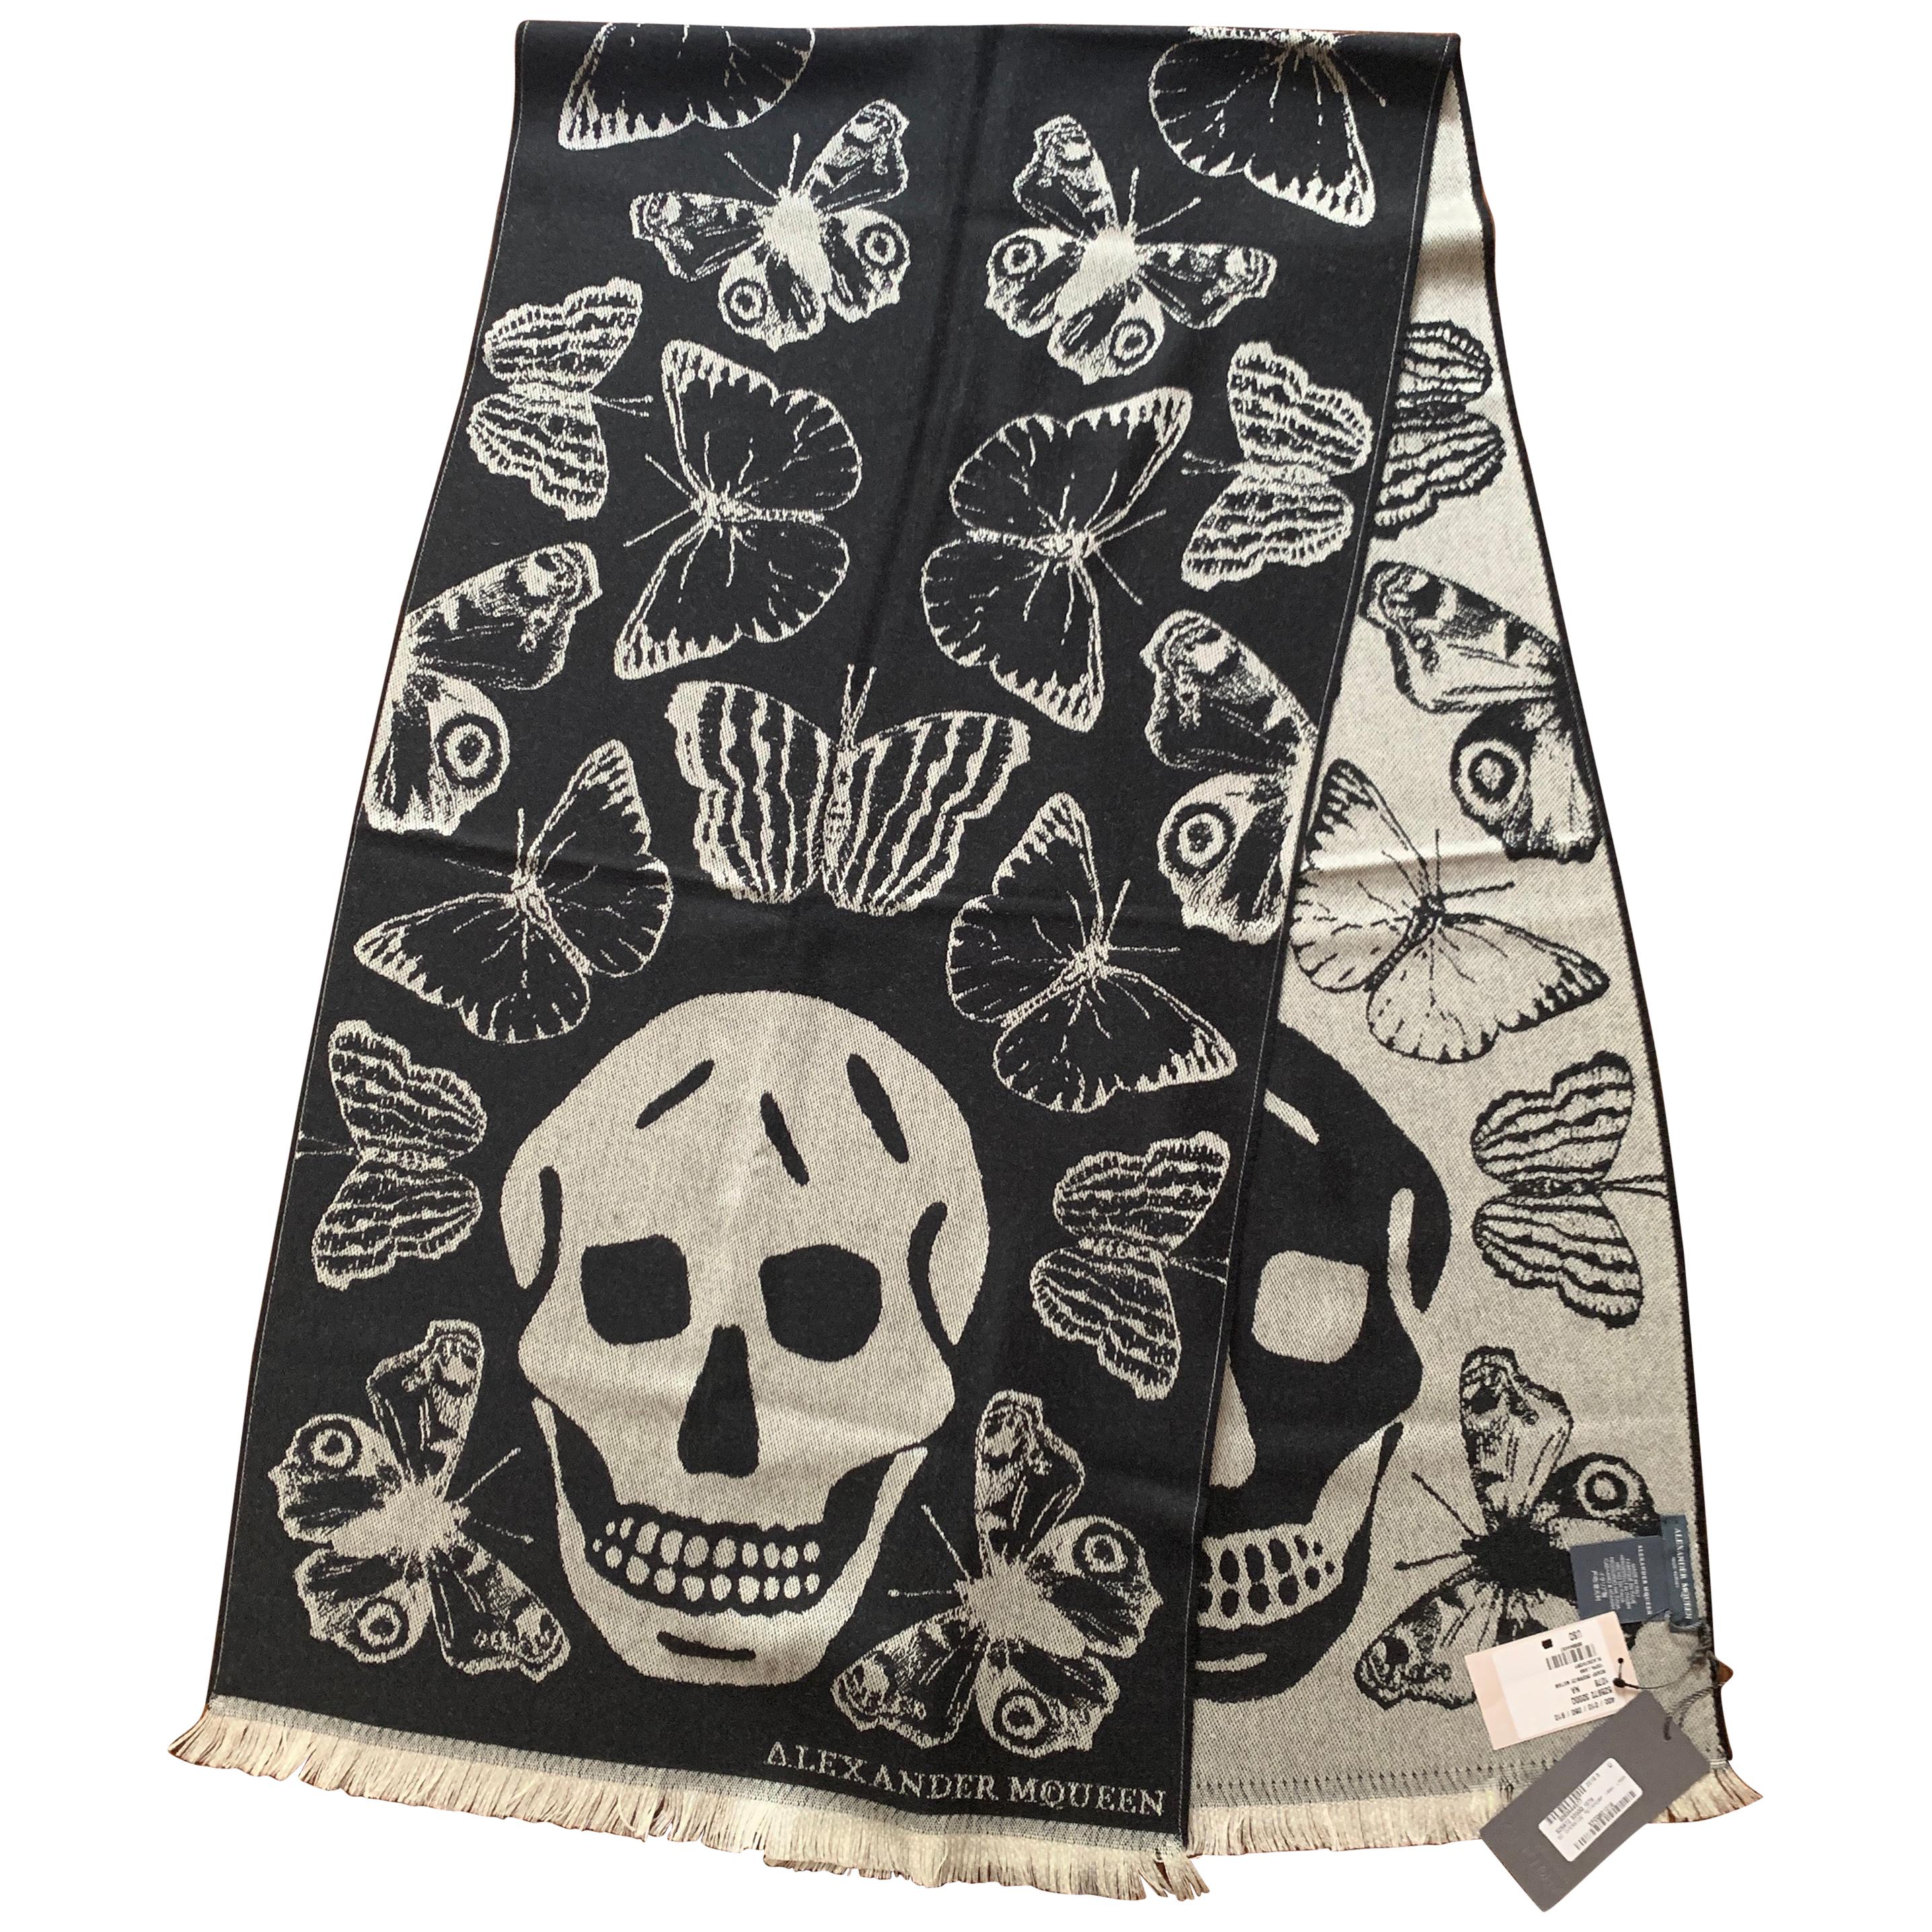 New Alexander McQueen Butterfly and Skull Scarf in Black and White